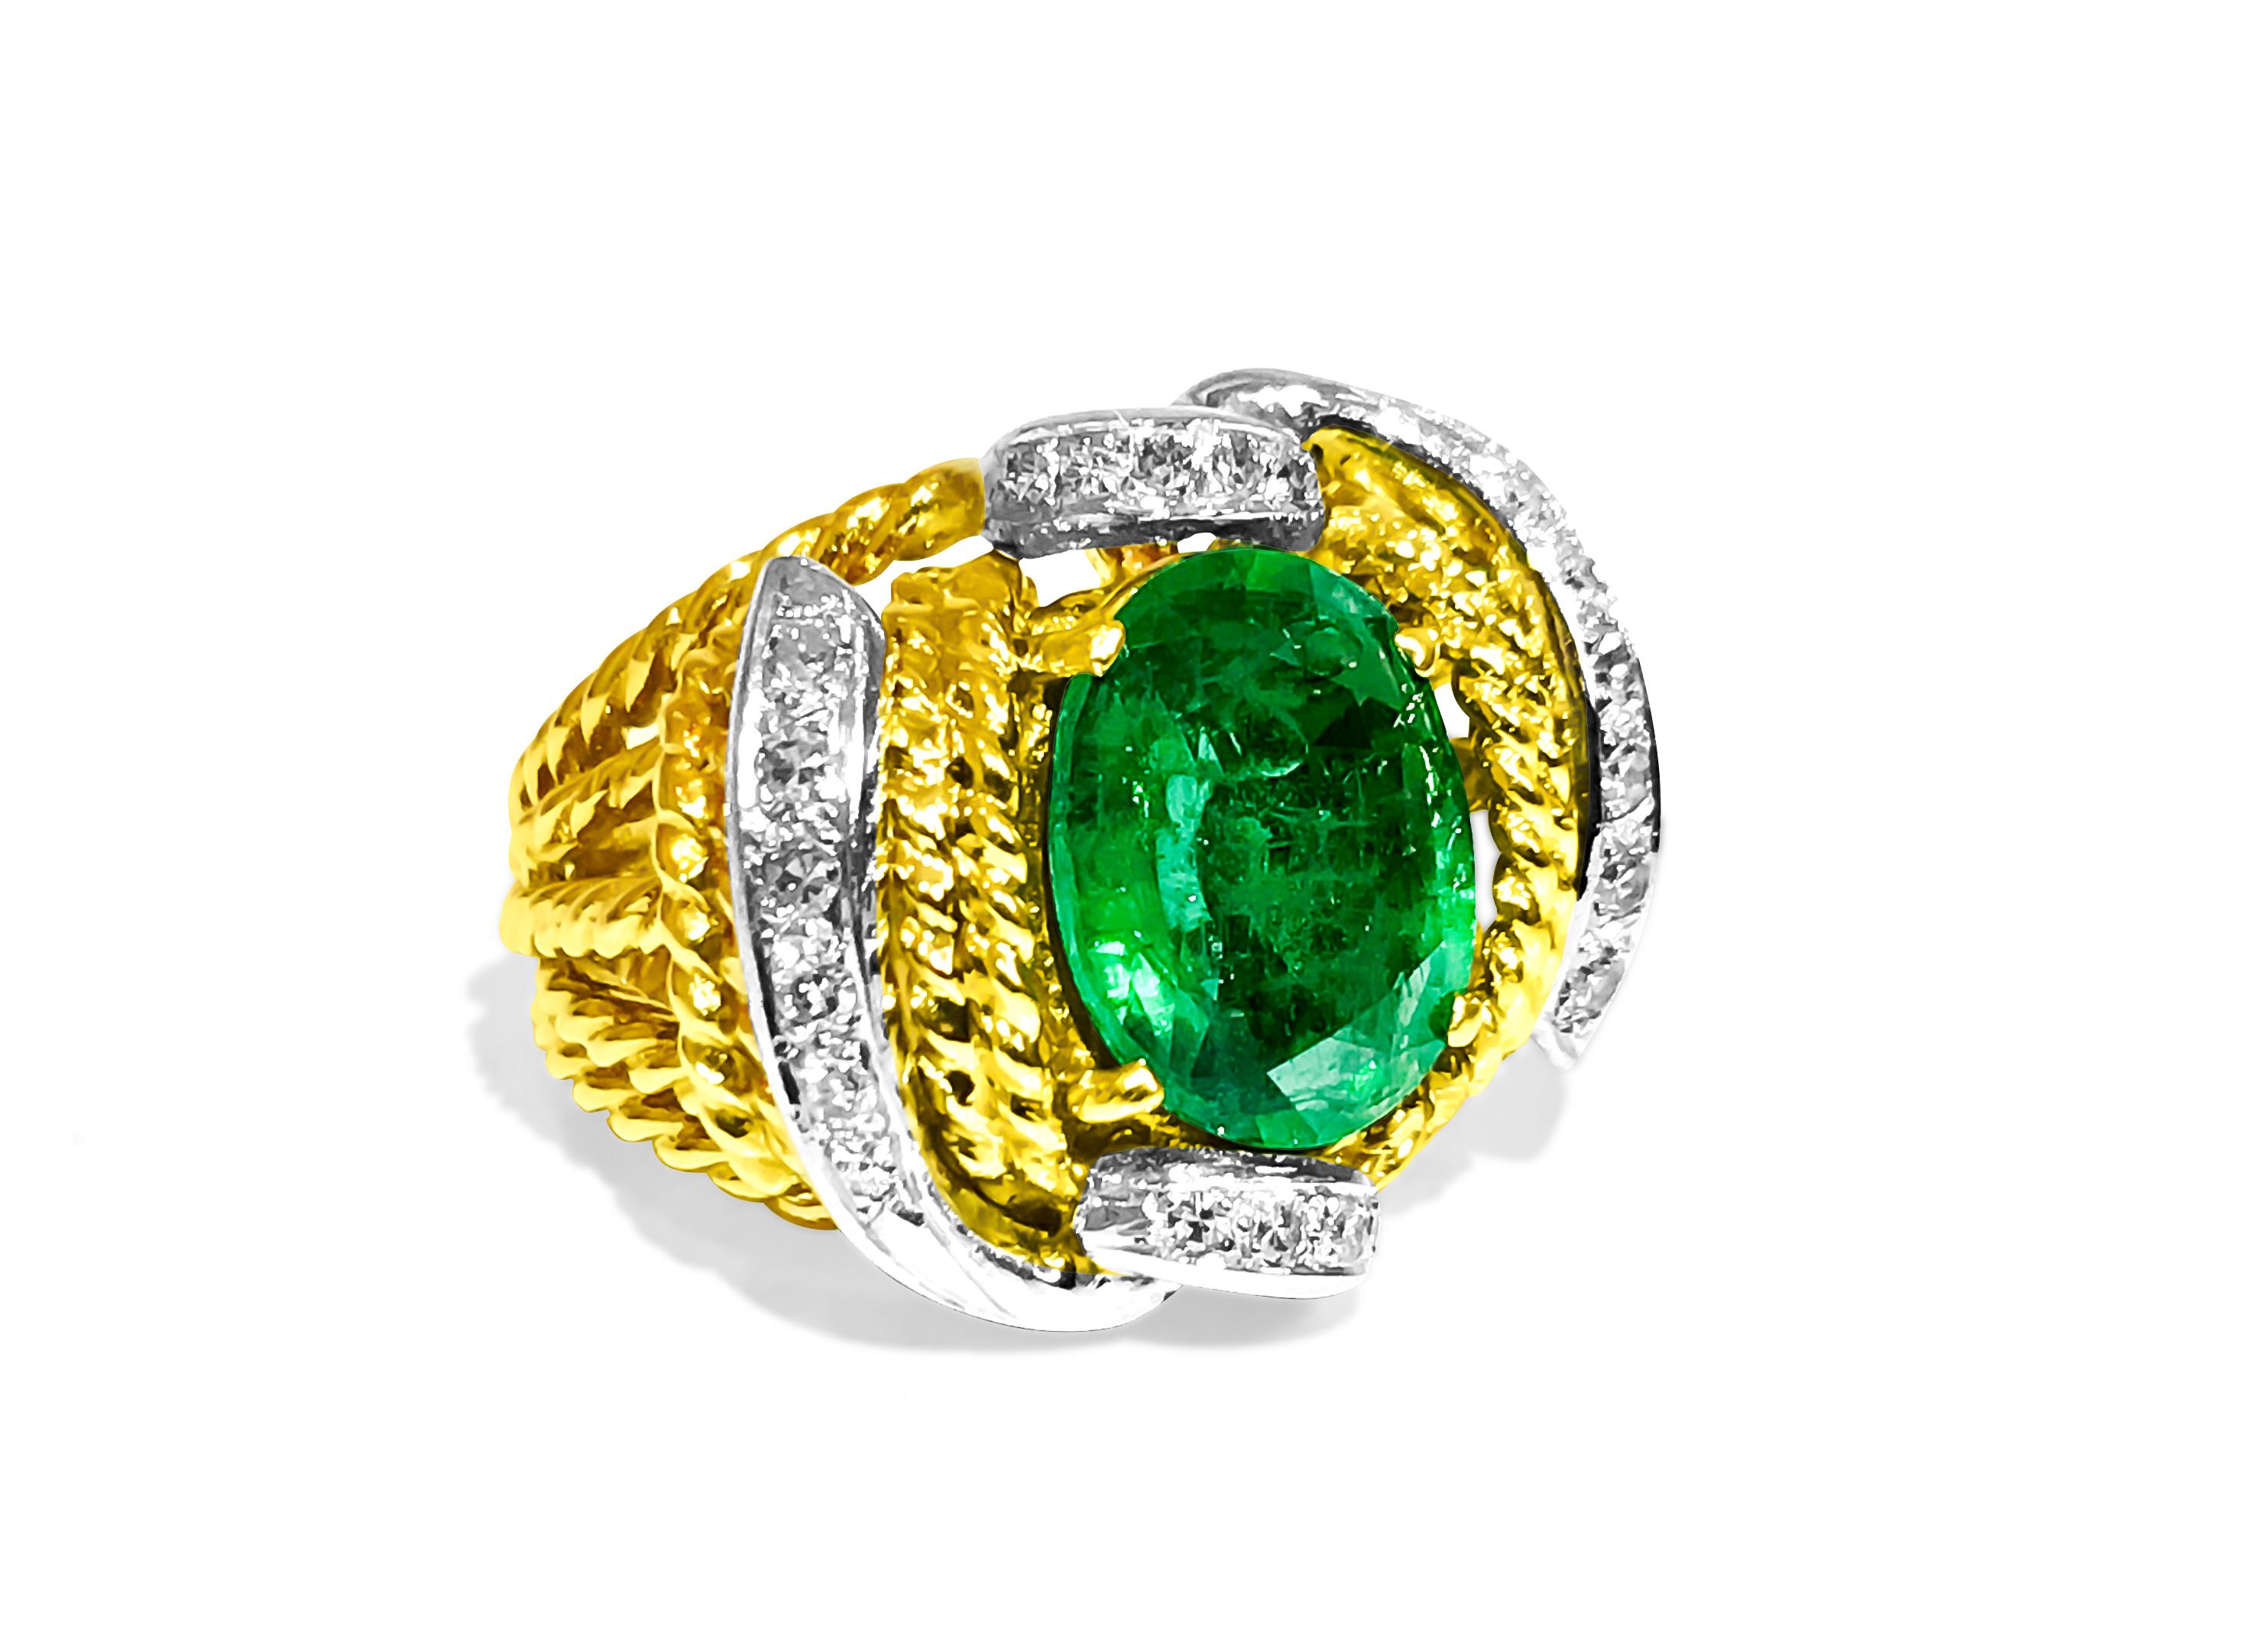 Fashioned from both 18K yellow and white gold, this two-tone ring showcases a stunning 3.50 carat oval-cut emerald, securely set in prongs, alongside 0.36 carats of round brilliant cut diamonds, boasting VS clarity and F-G color. With meticulous